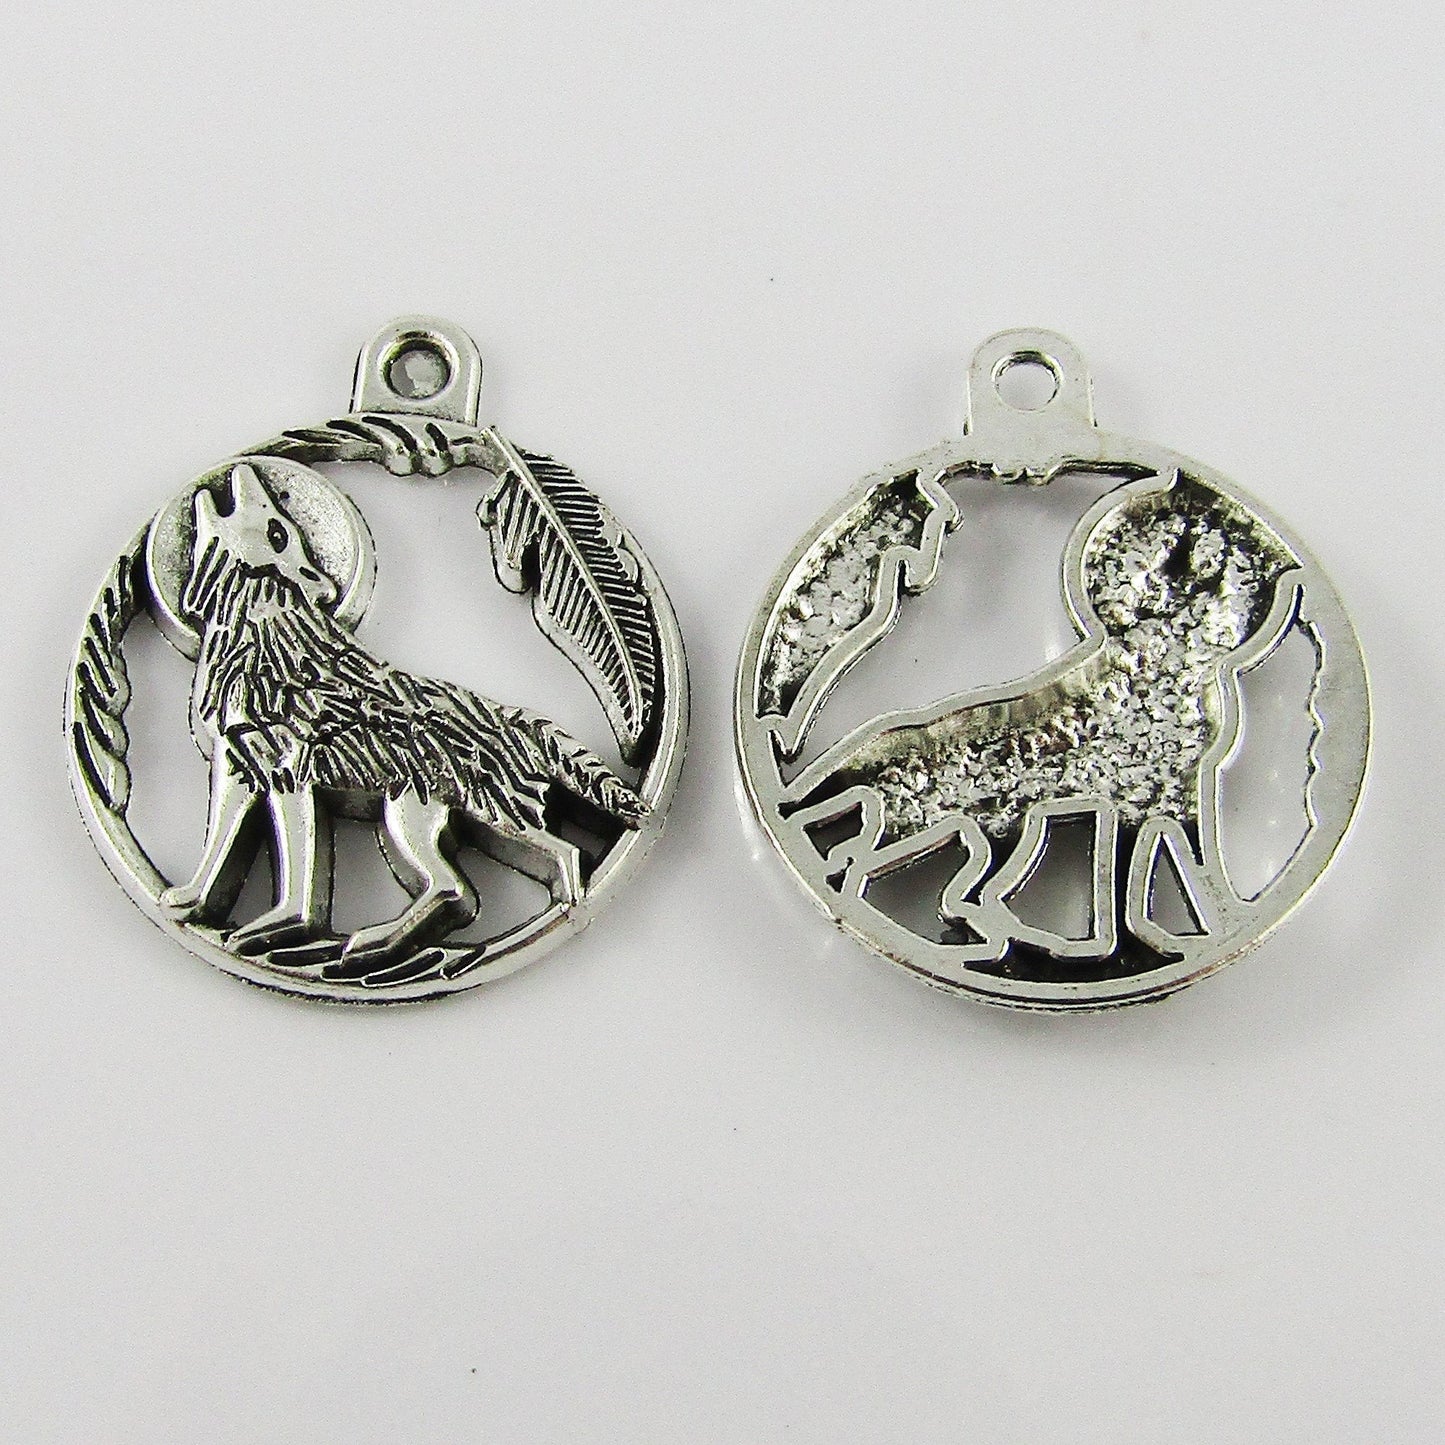 Bulk Howling Wolf Round Charm Pendant American Wolf Alloy 25x21mm Select Qty